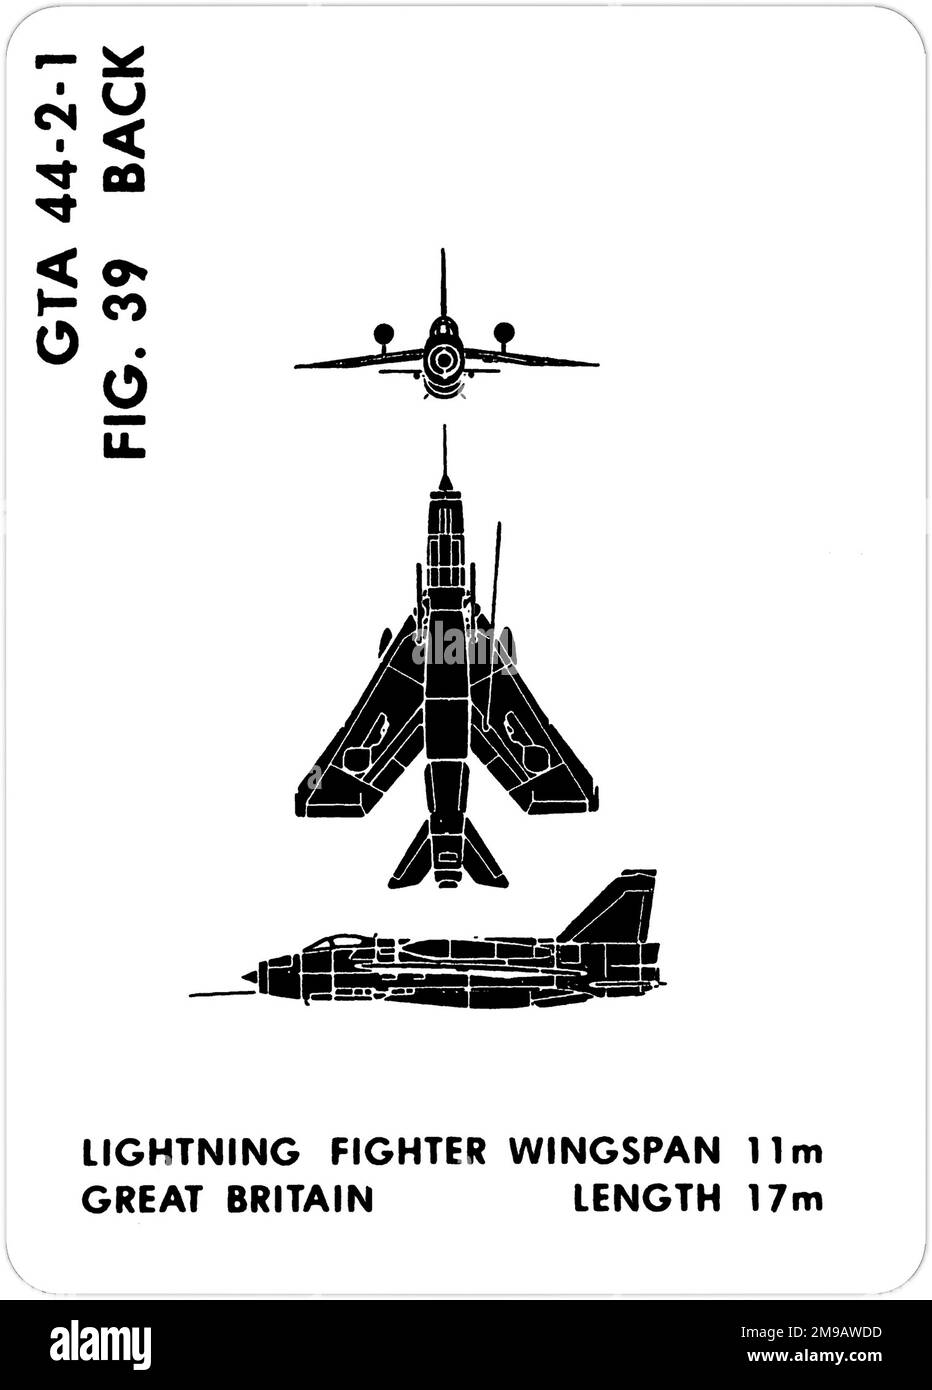 BAC Lightning F.6. This is one of the series of Graphics Training Aids (GTA) used by the United States Army to train their personnel to recognize friendly and hostile aircraft. This particular set, GTA 44-2-1, was issued in July1977. The set features aircraft from: Canada, Italy, United Kingdom, United States, and the USSR. Stock Photo